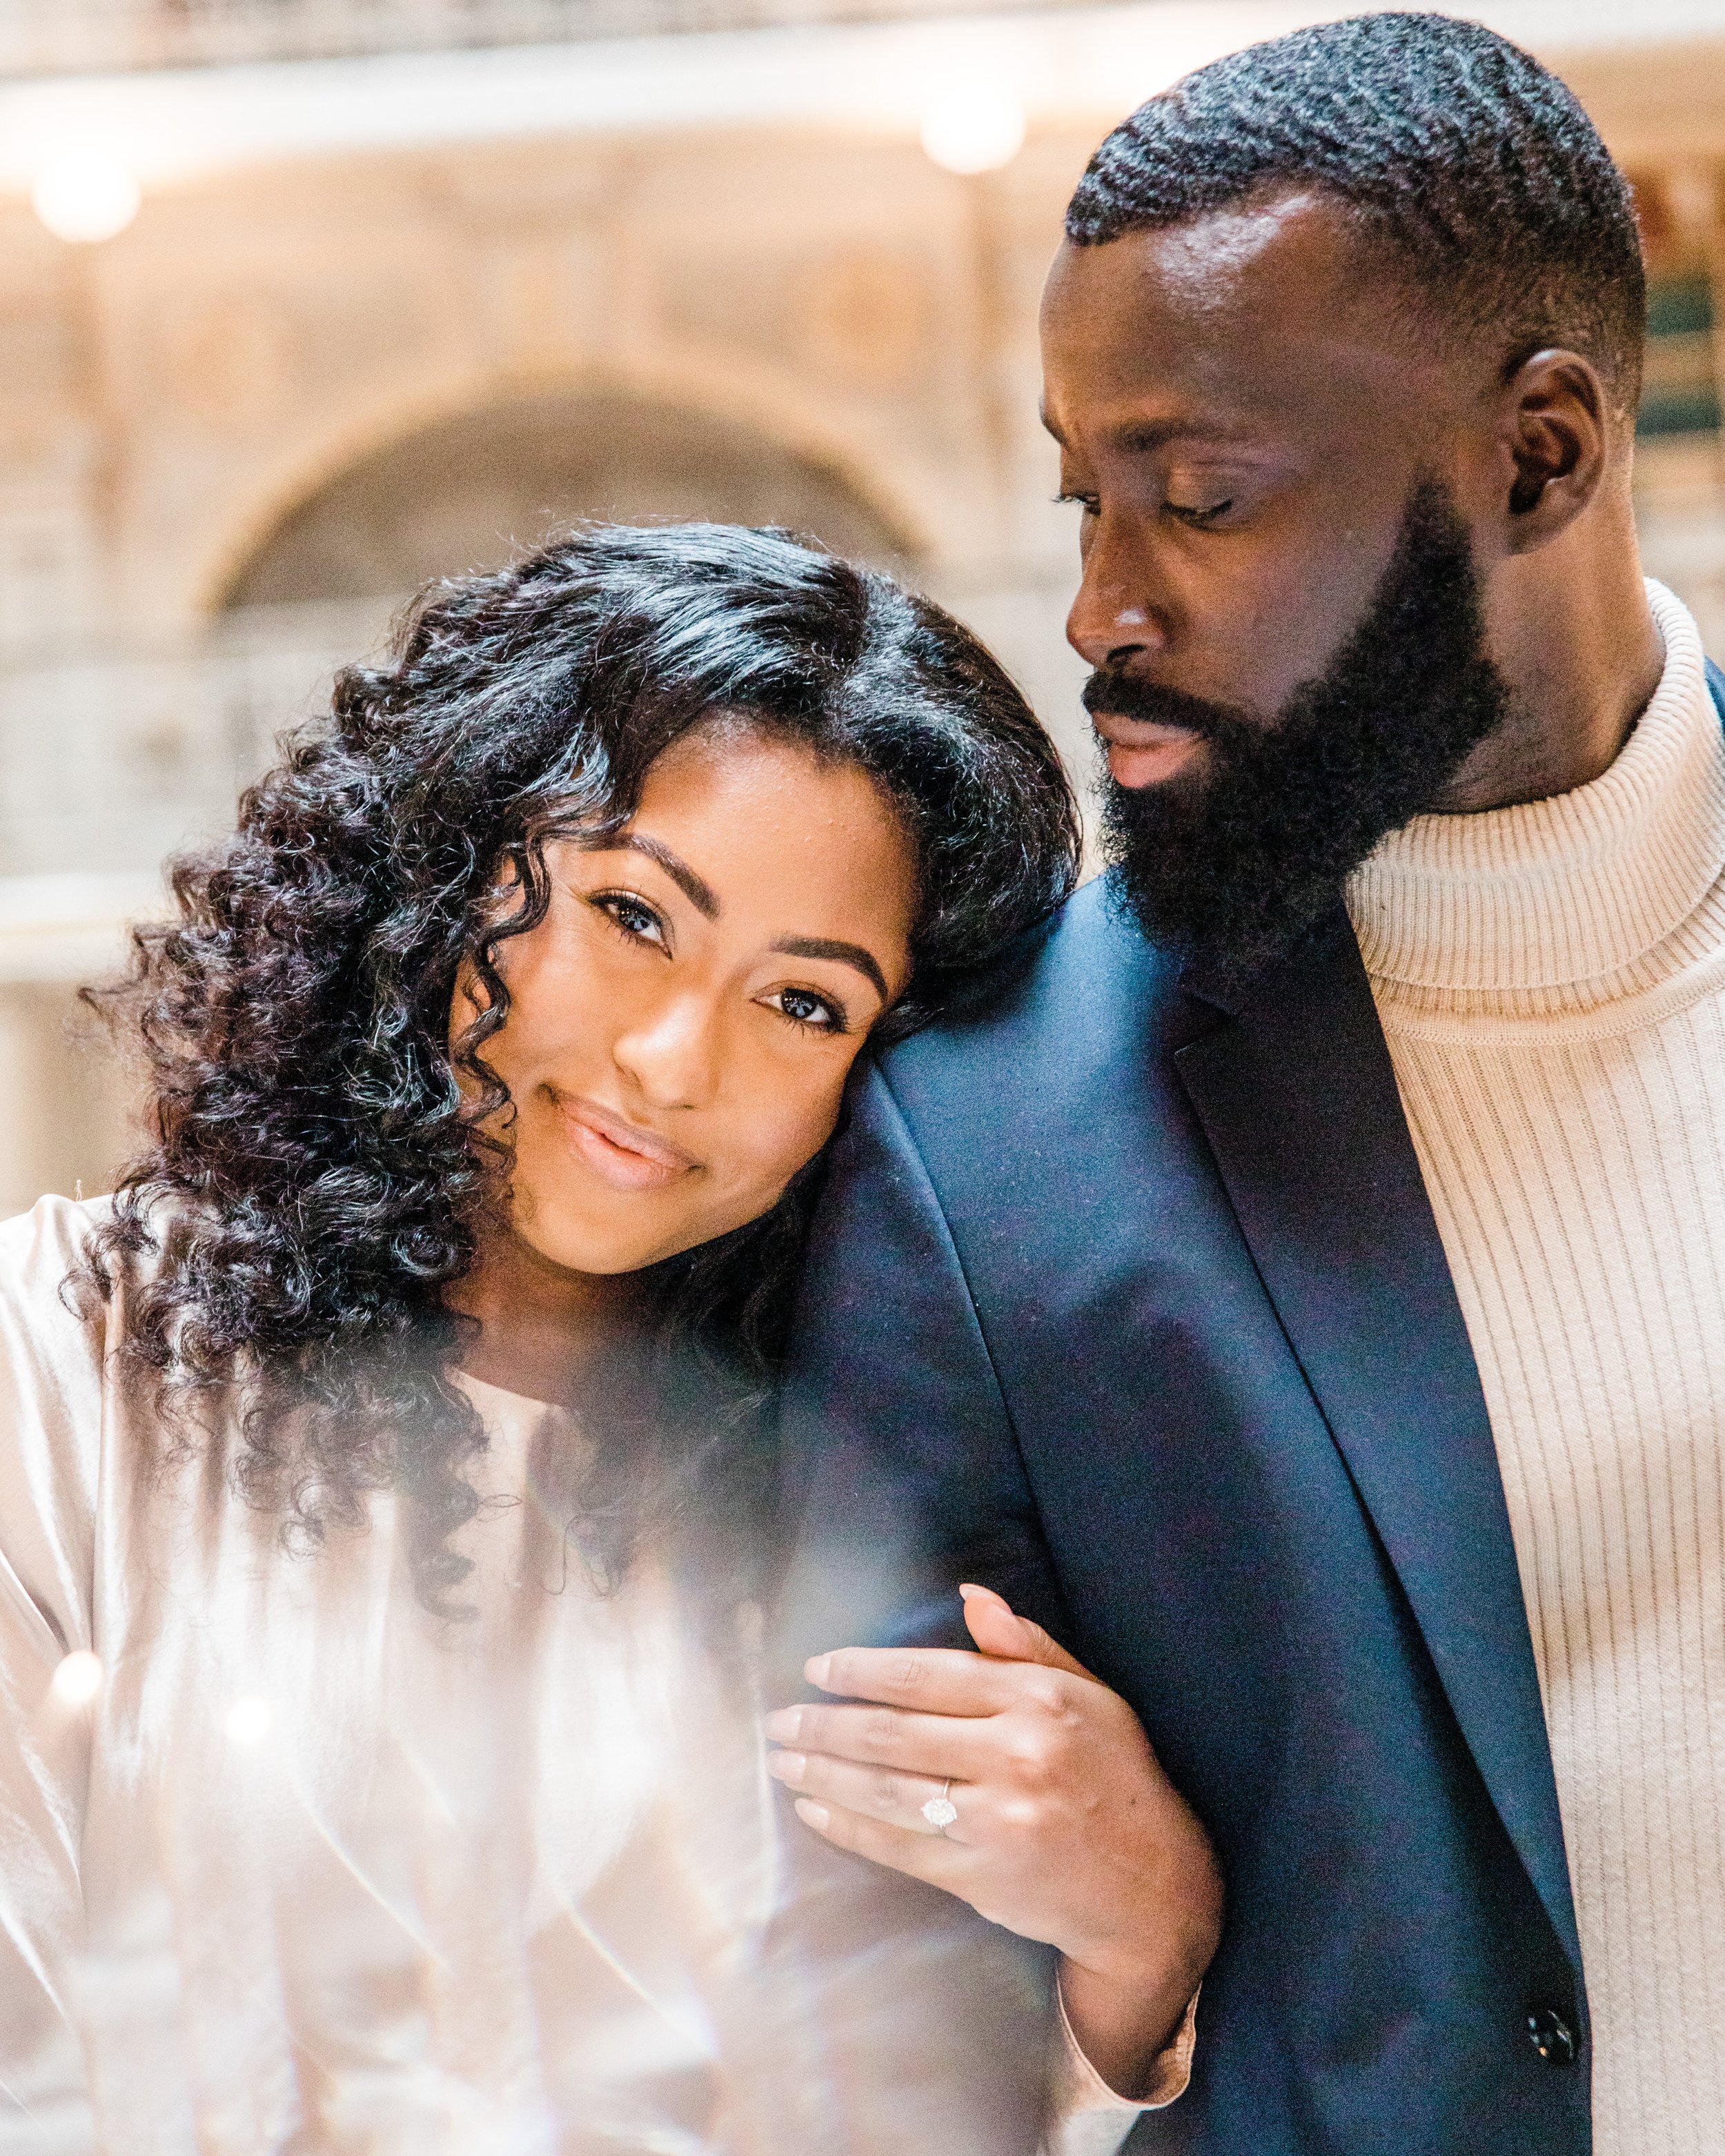 Disney Beauty and The Beast Inspired Engagement Session at The Peabody Library Baltimore Maryland shot by Megapixels Media Photography-33.jpg